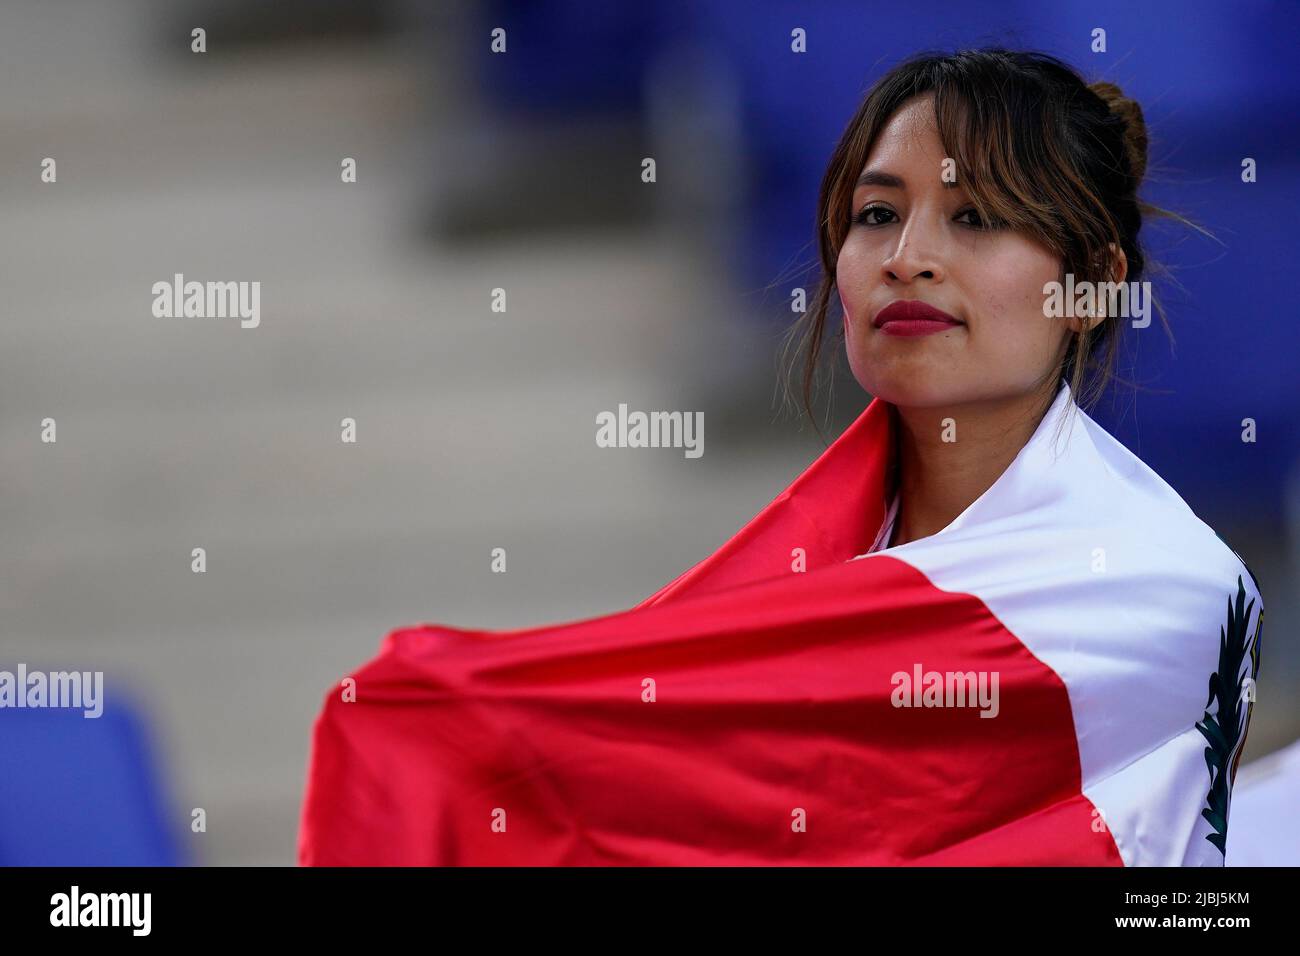 Peru fan during the friendly match between Peru and New Zealand played at RCDE Stadium on June 5, 2022 in Barcelona, Spain. (Photo by Bagu Blanco / PRESSINPHOTO) Stock Photo